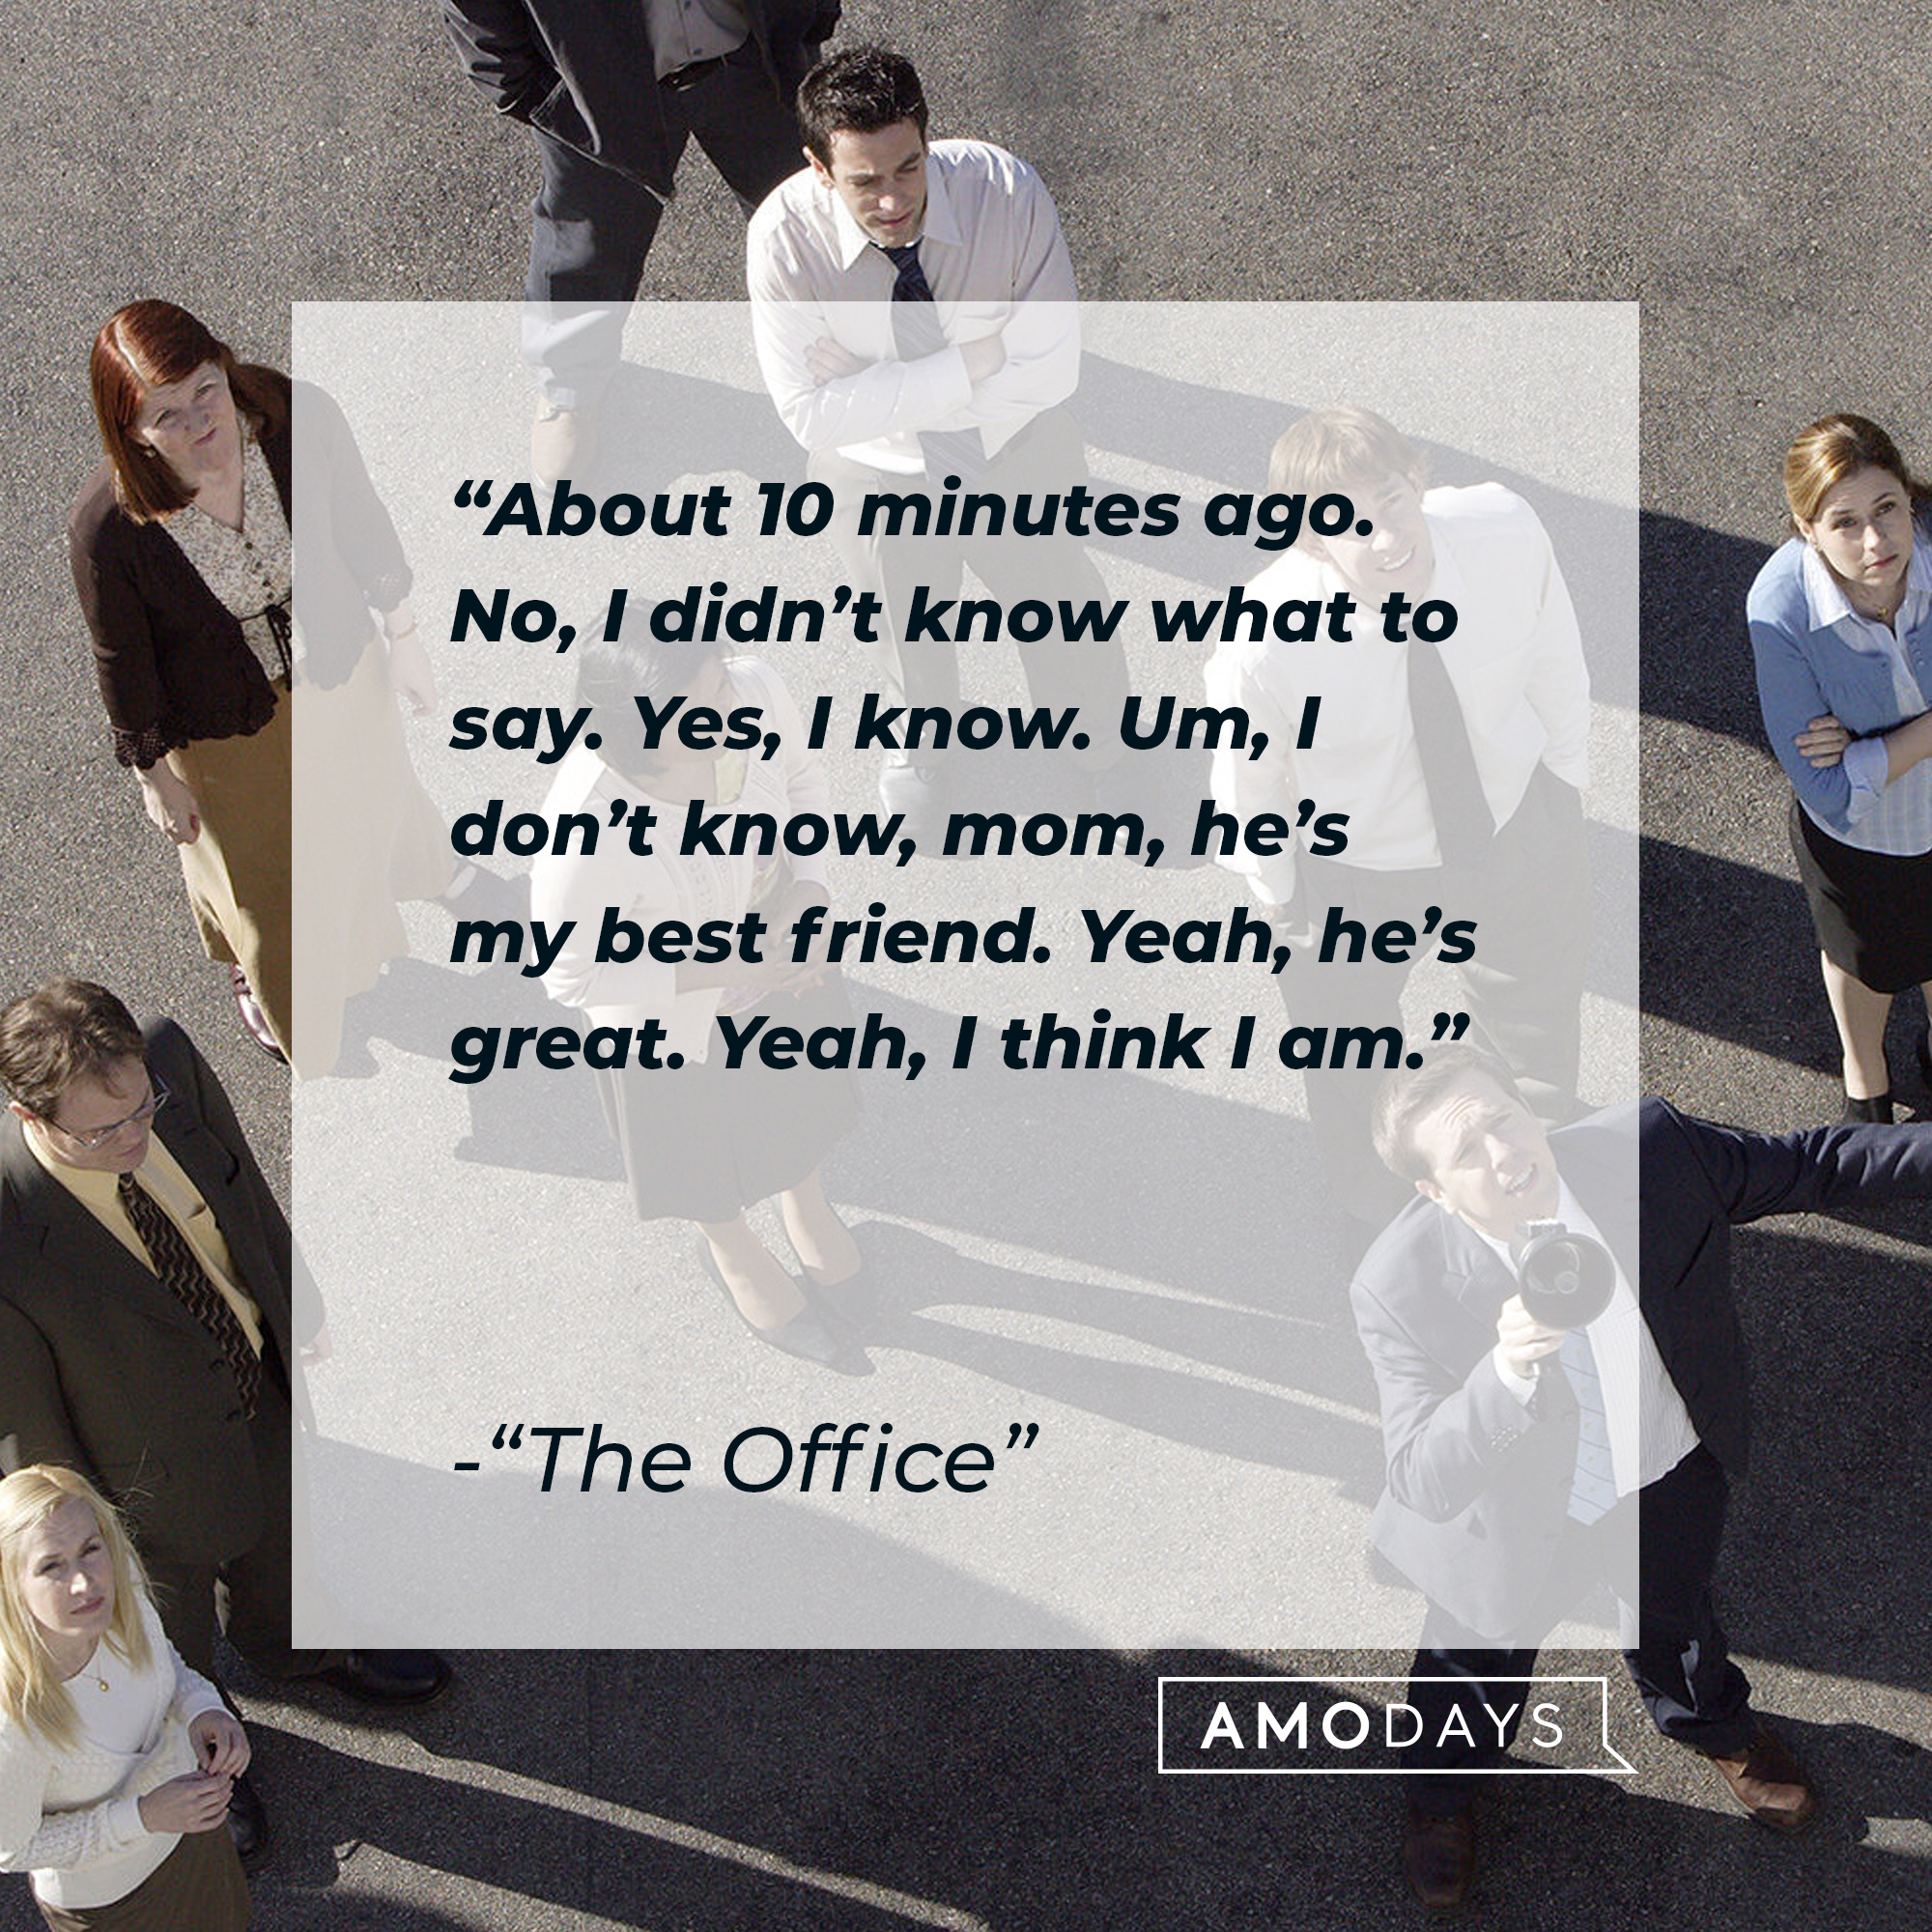 A photo from "The Office" with the quote, "About 10 minutes ago. No, I didn’t know what to say. Yes, I know. Um, I don’t know, mom, he’s my best friend. Yeah, he’s great. Yeah, I think I am." | Source: Facebook/TheOfficeTV